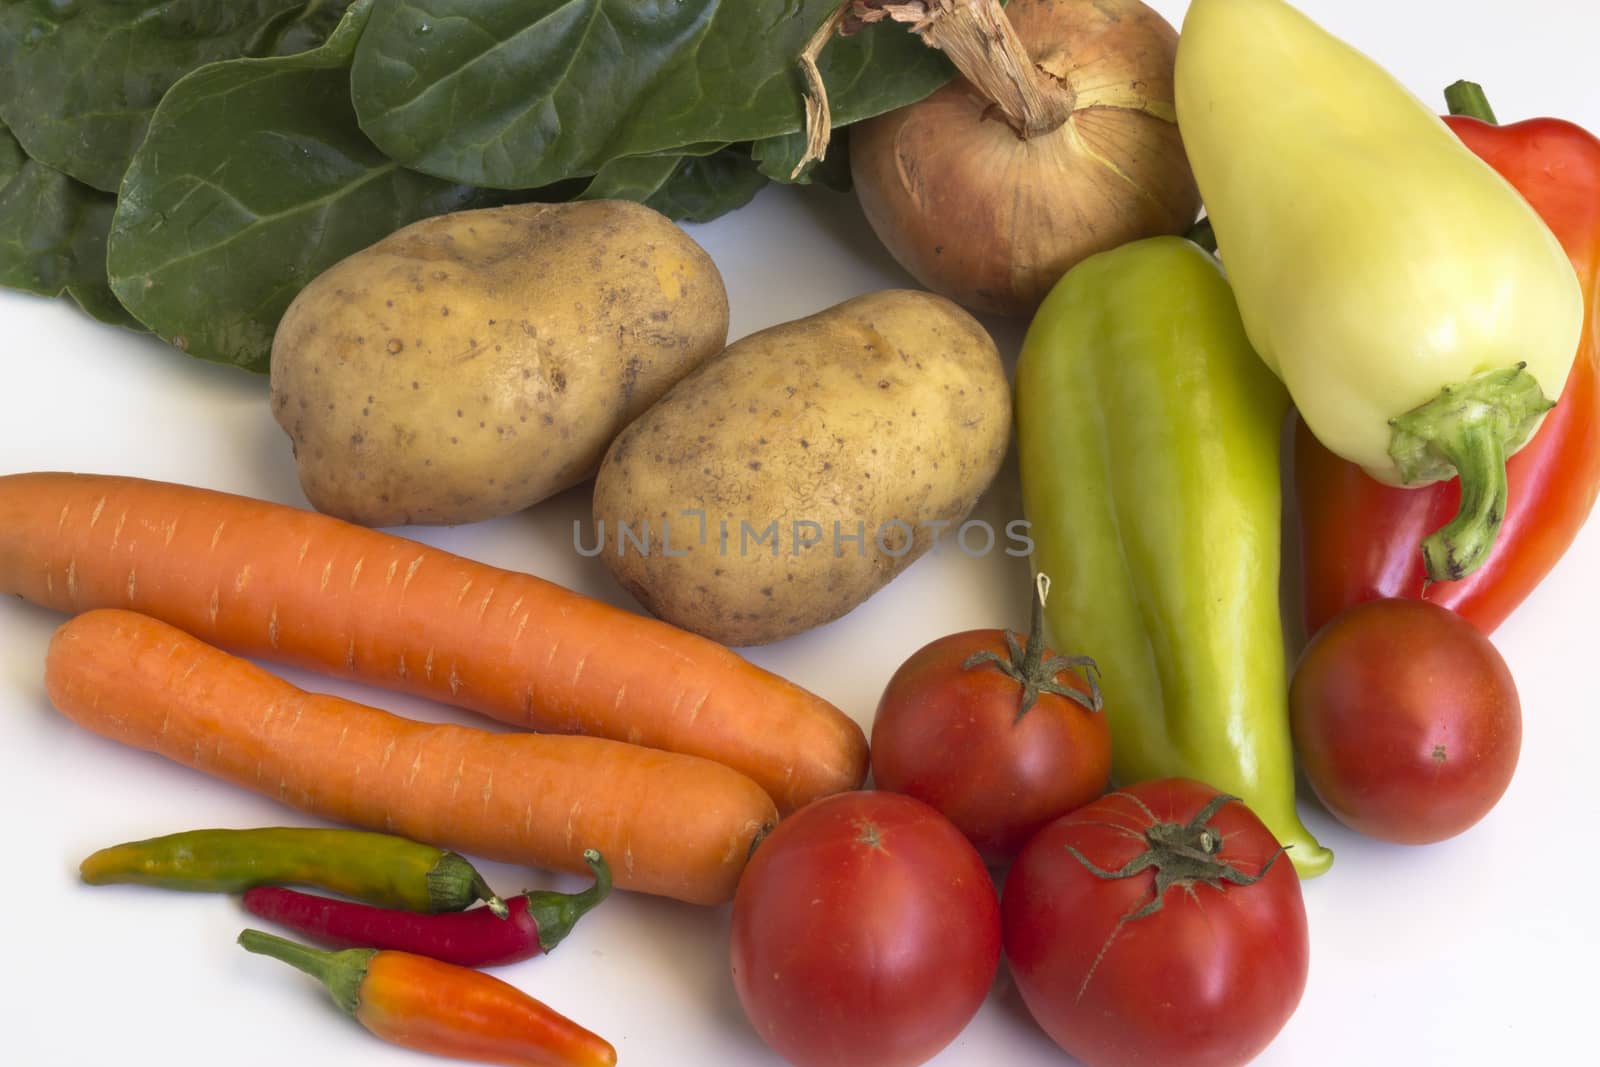 Colorful vegetables by Kidza